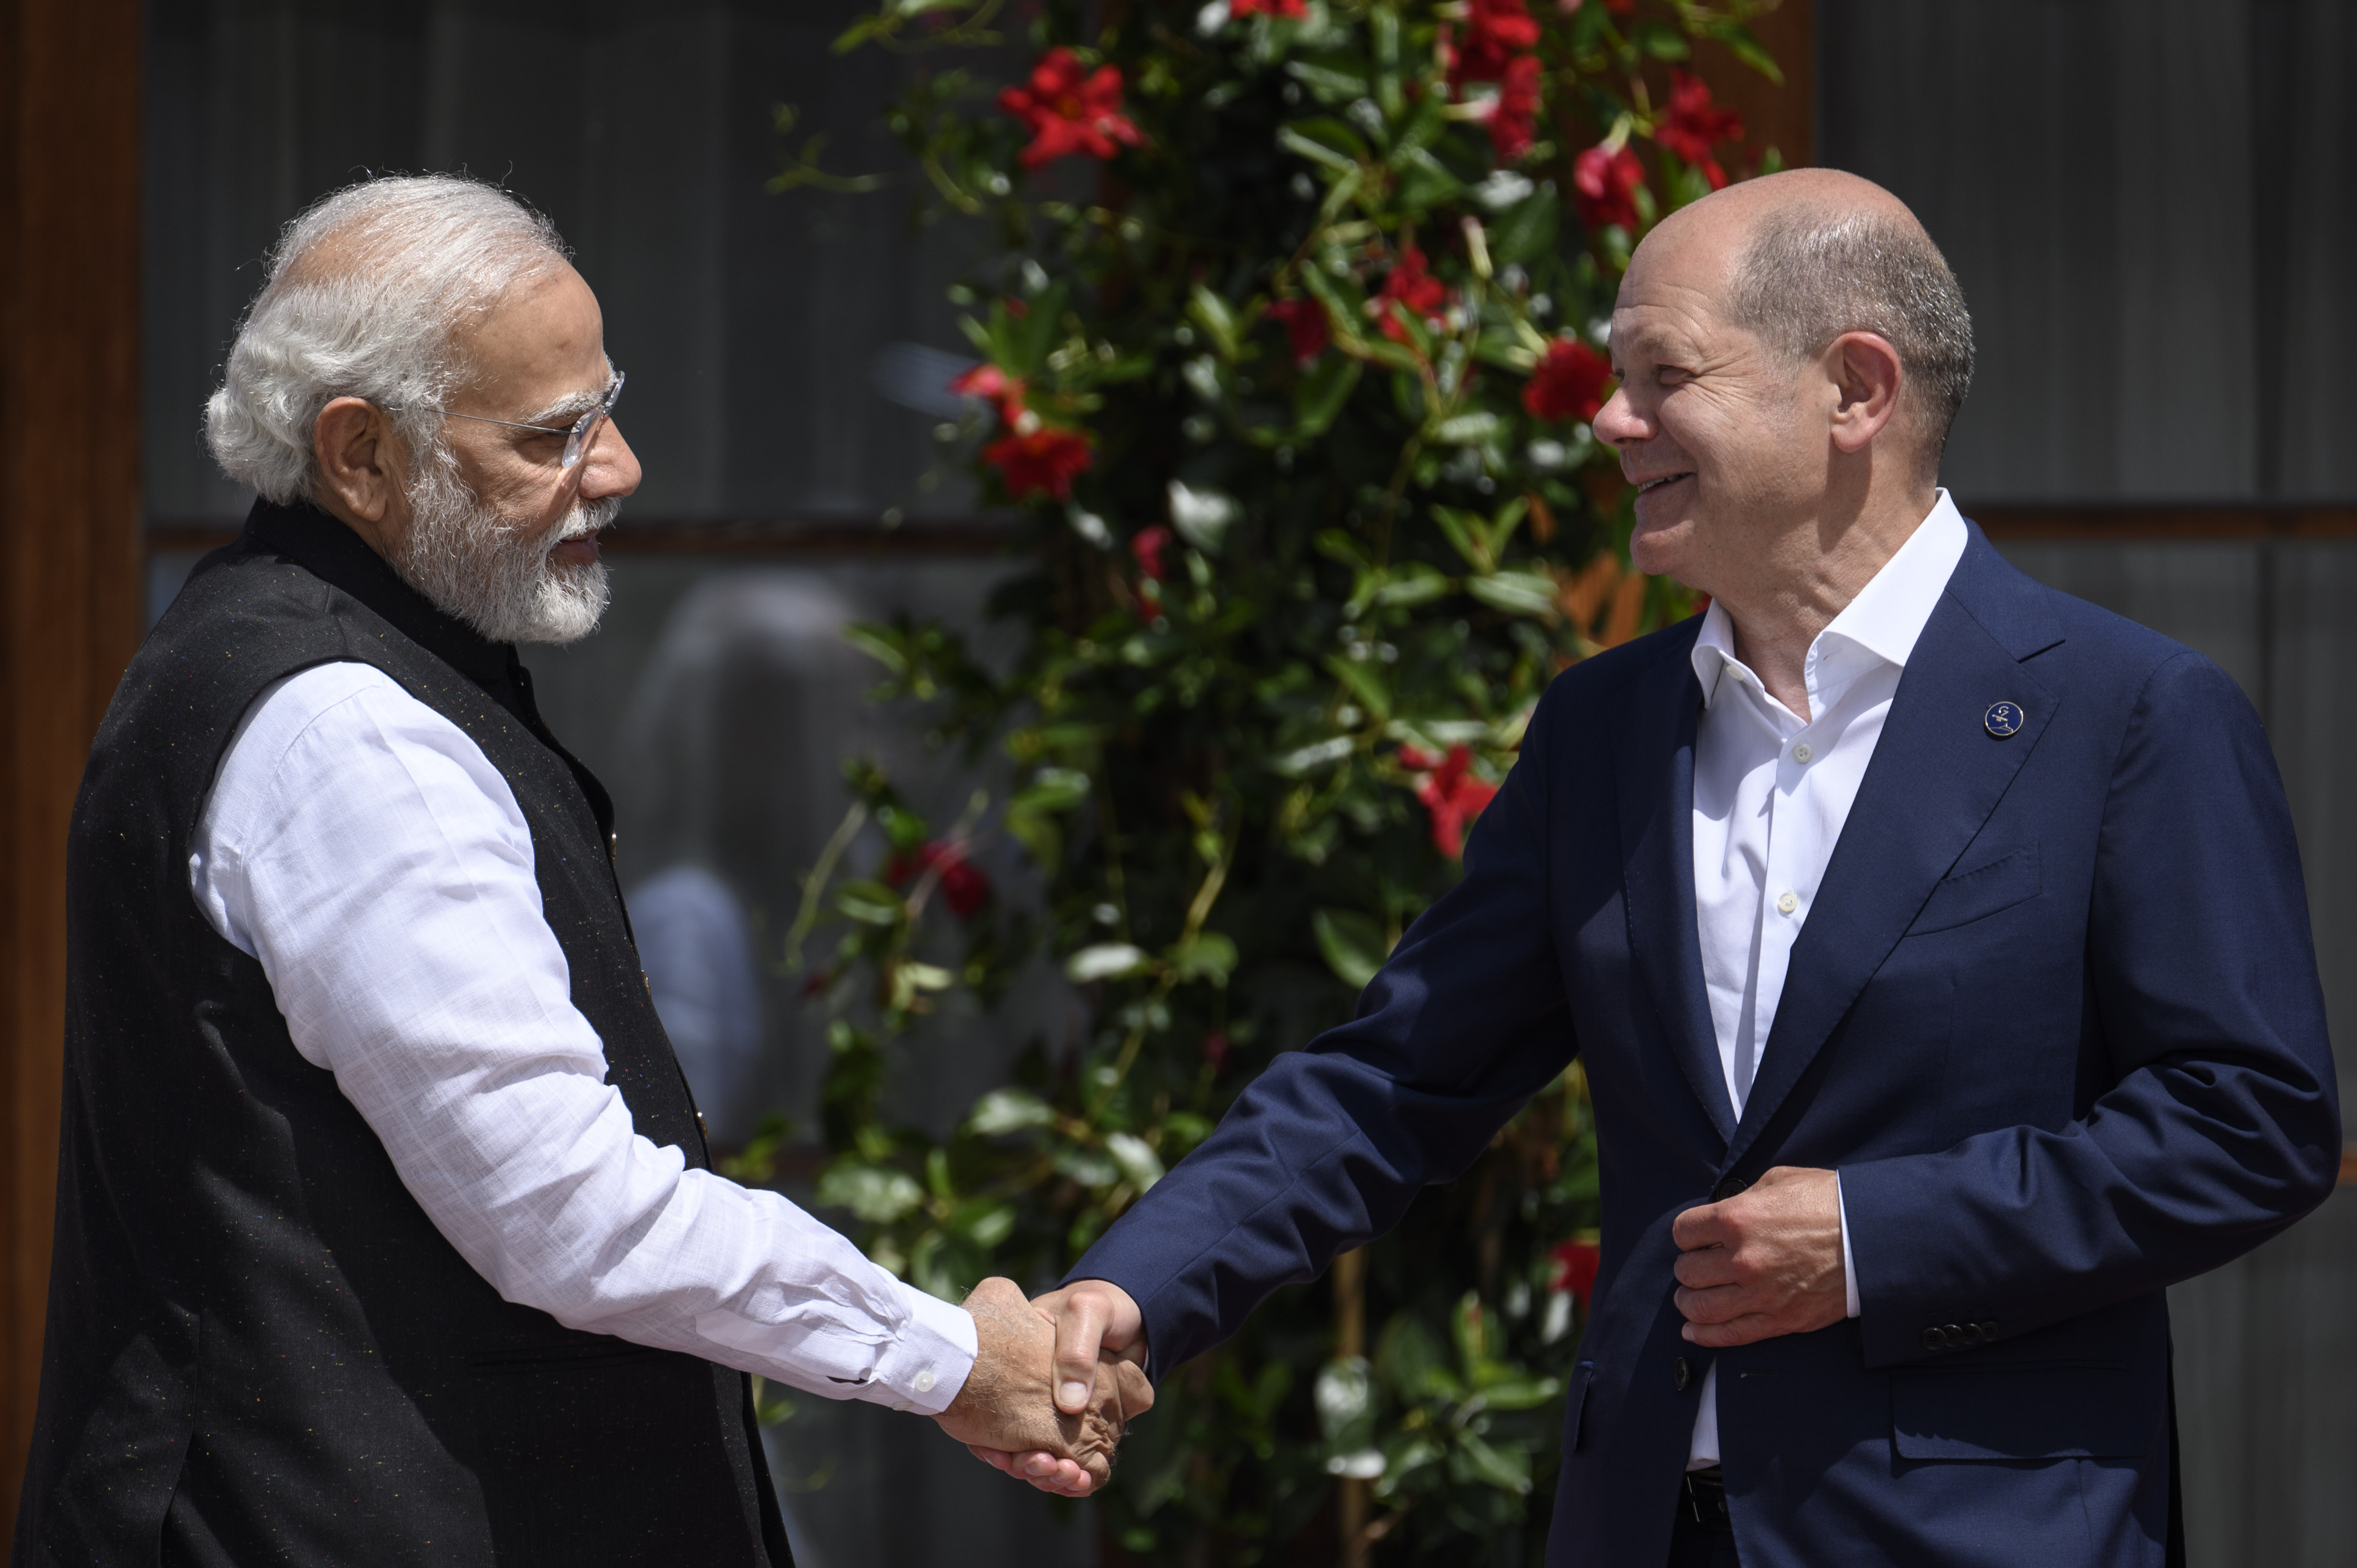 Chancellor Olaf Scholz welcomes Indian Prime Minister Narendra Modi to Schloss Elmau.